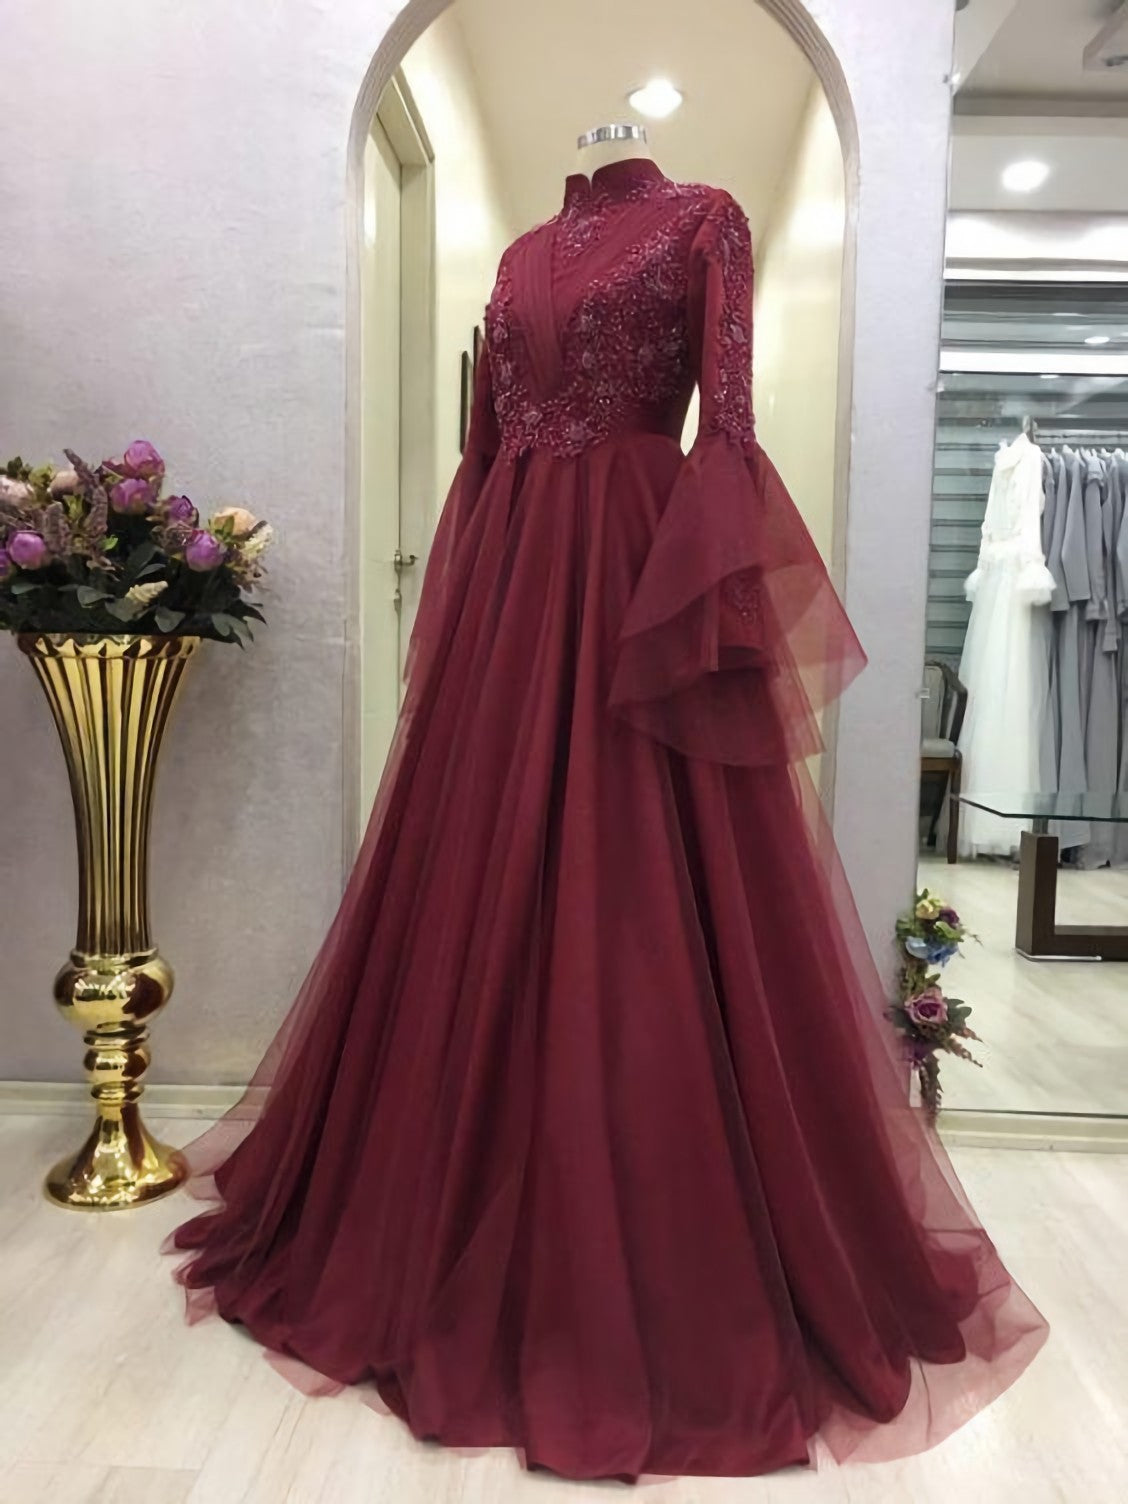 Evening Dress For Wedding, Princess Party Gown Sweet 16 Formal Prom Dress